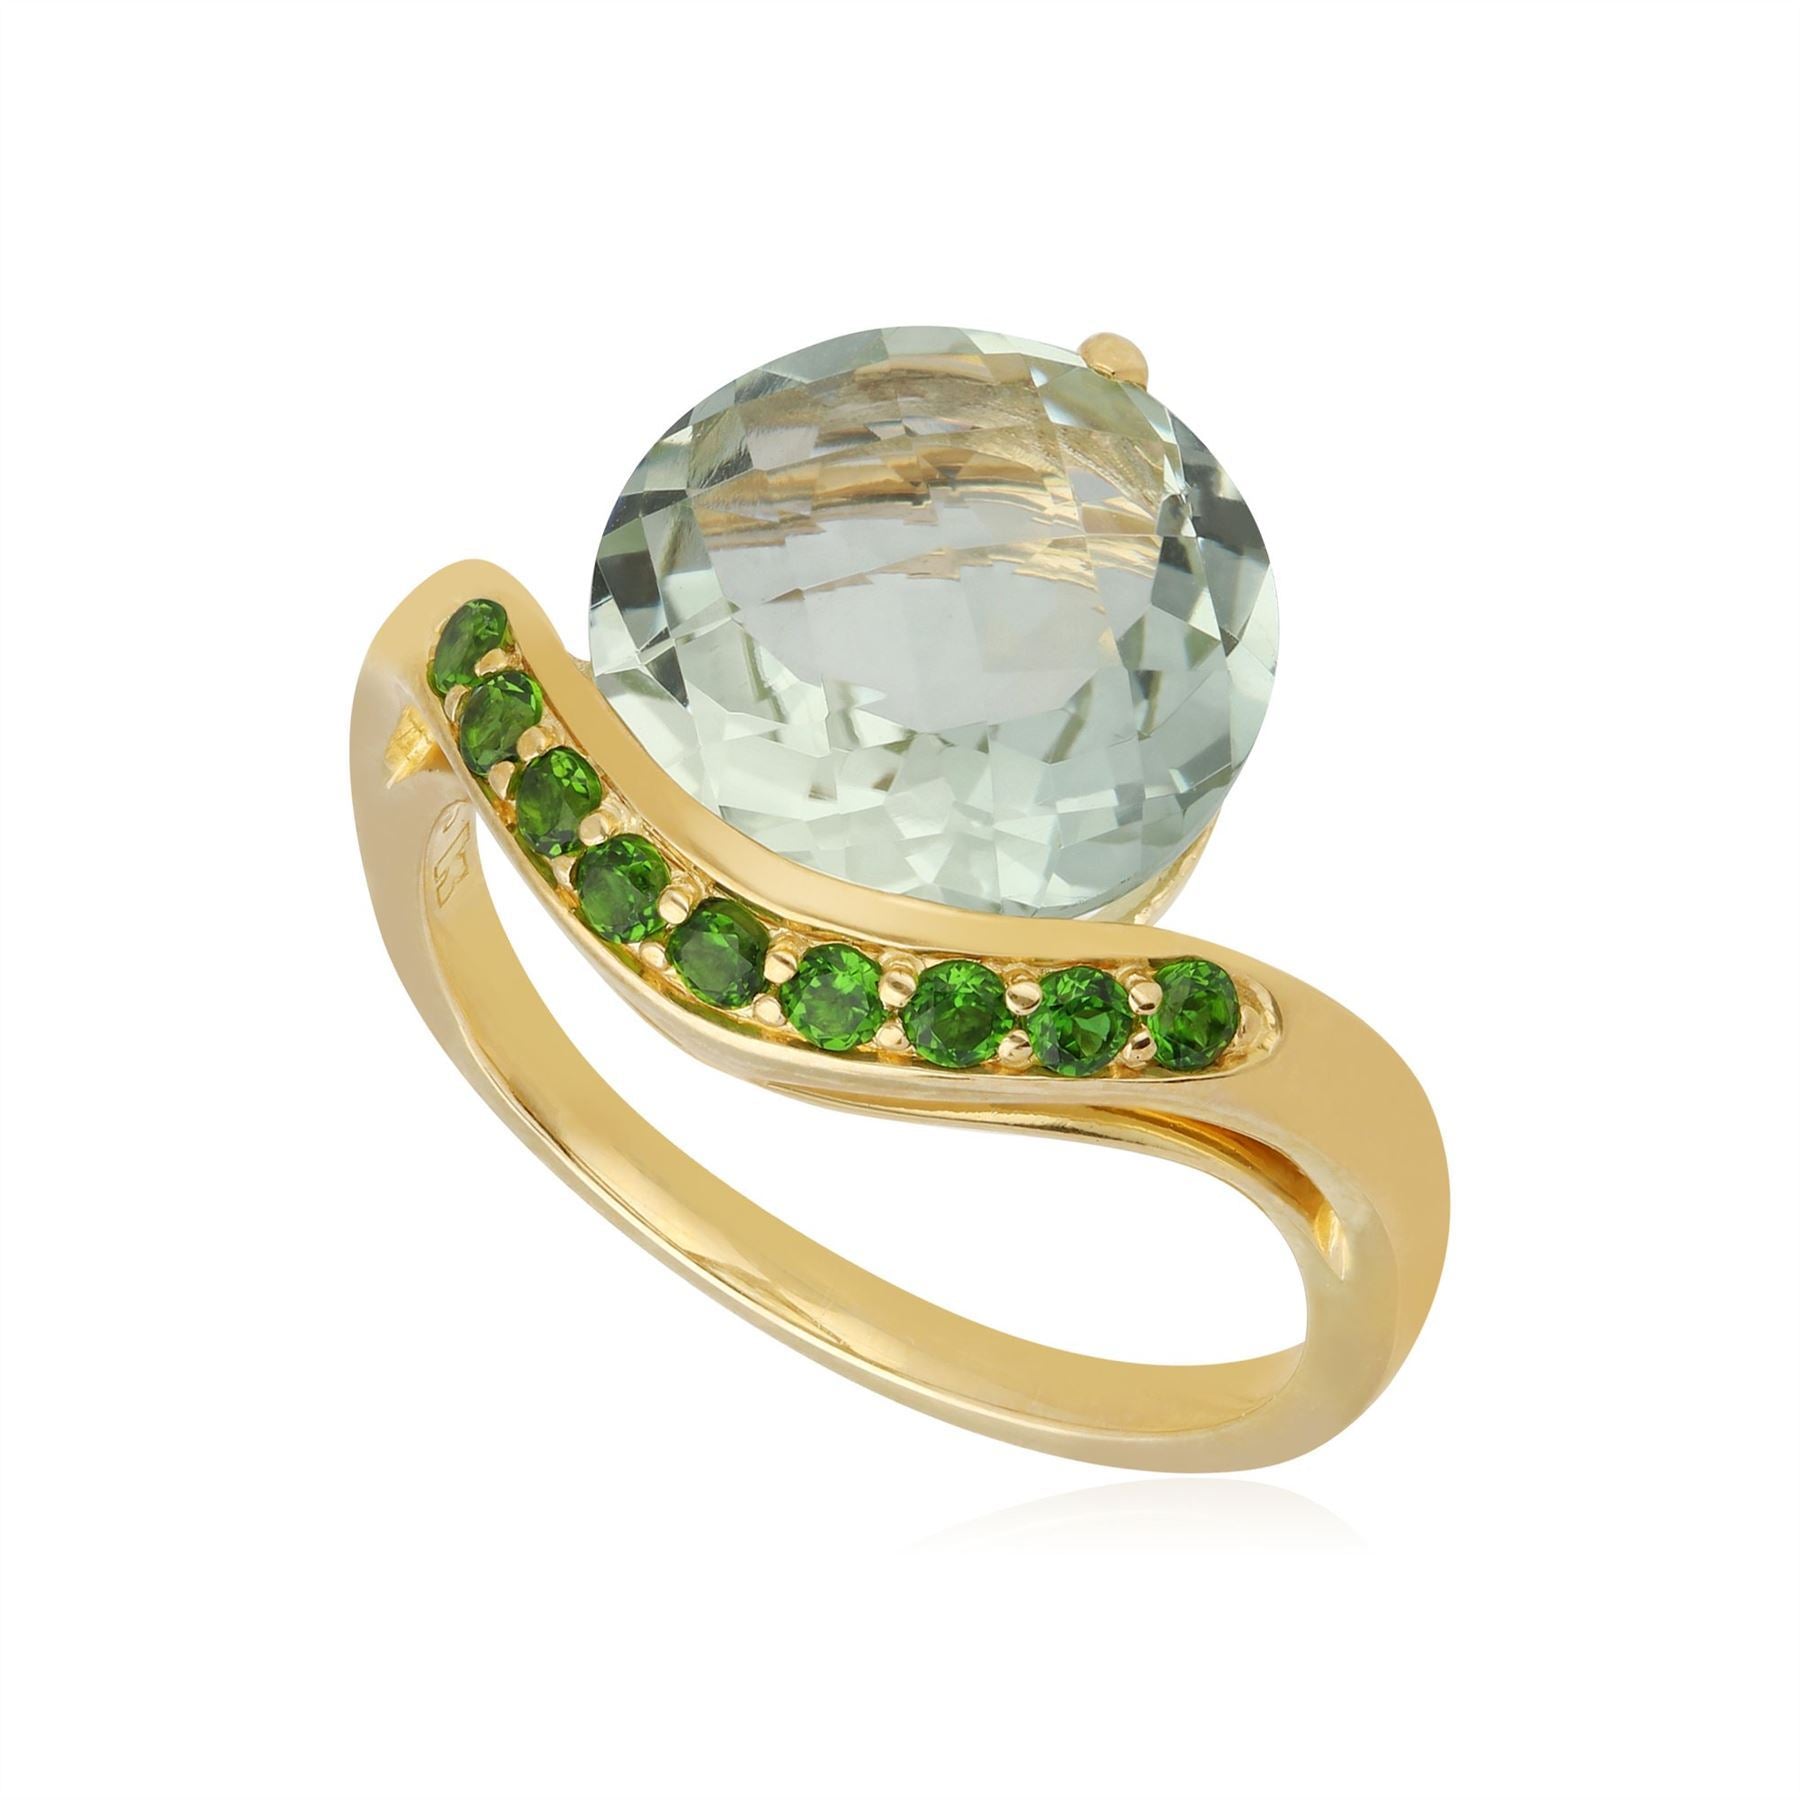 Kosmos Green Mint Quartz & Chrome Diopside Cocktail Ring in 9ct Yellow Gold